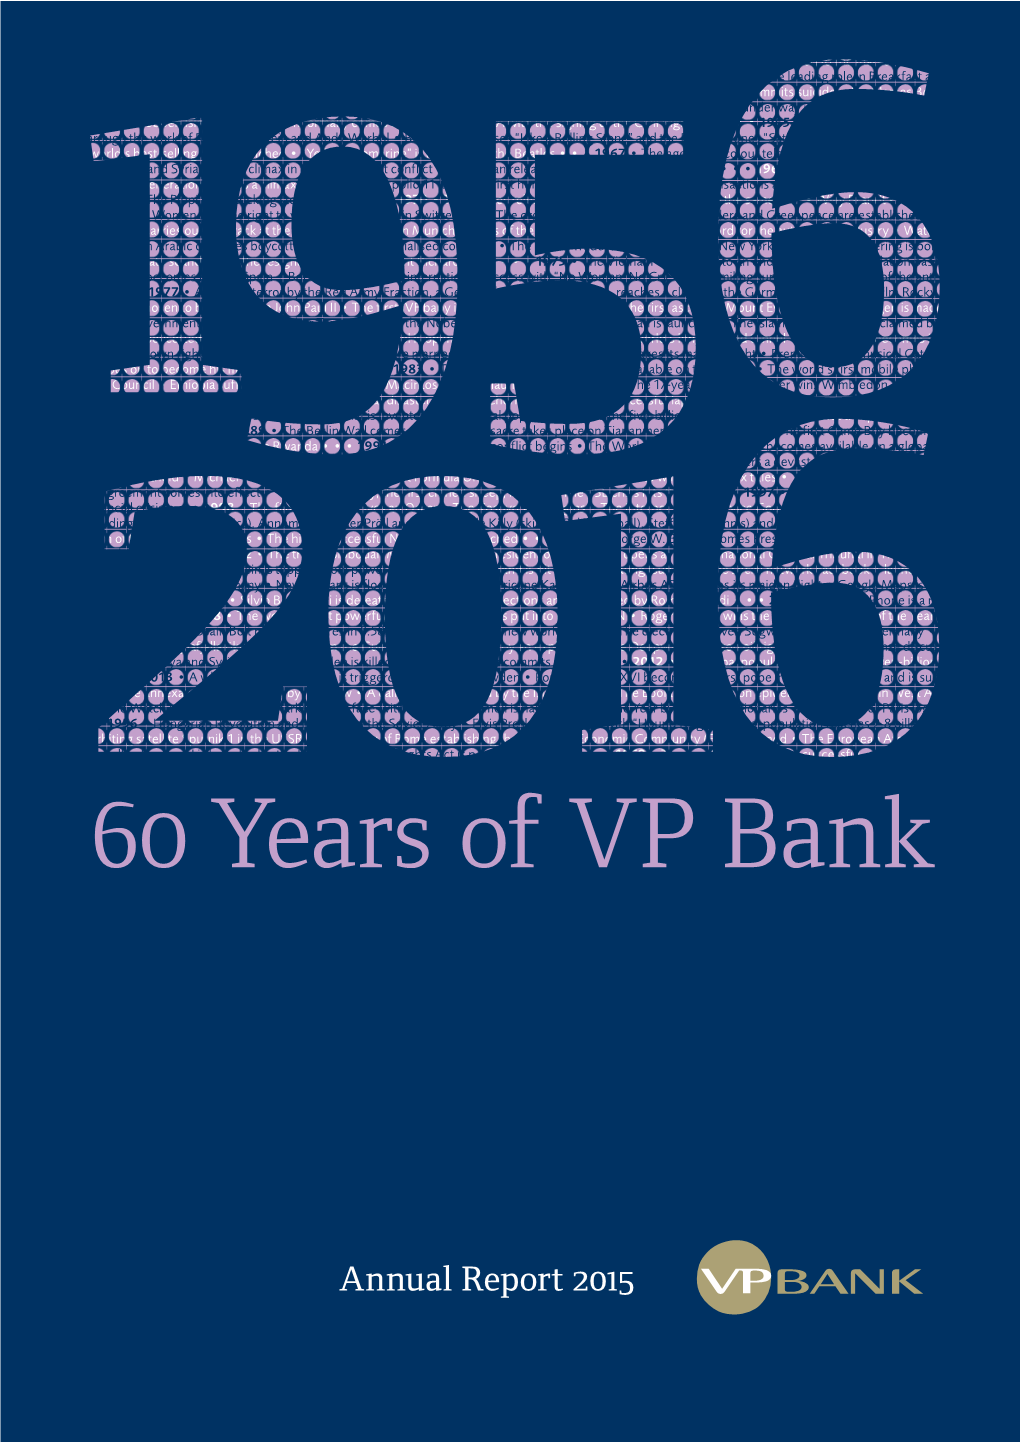 Annual Report 2015 Financial Report 2015 of VP Bank Group